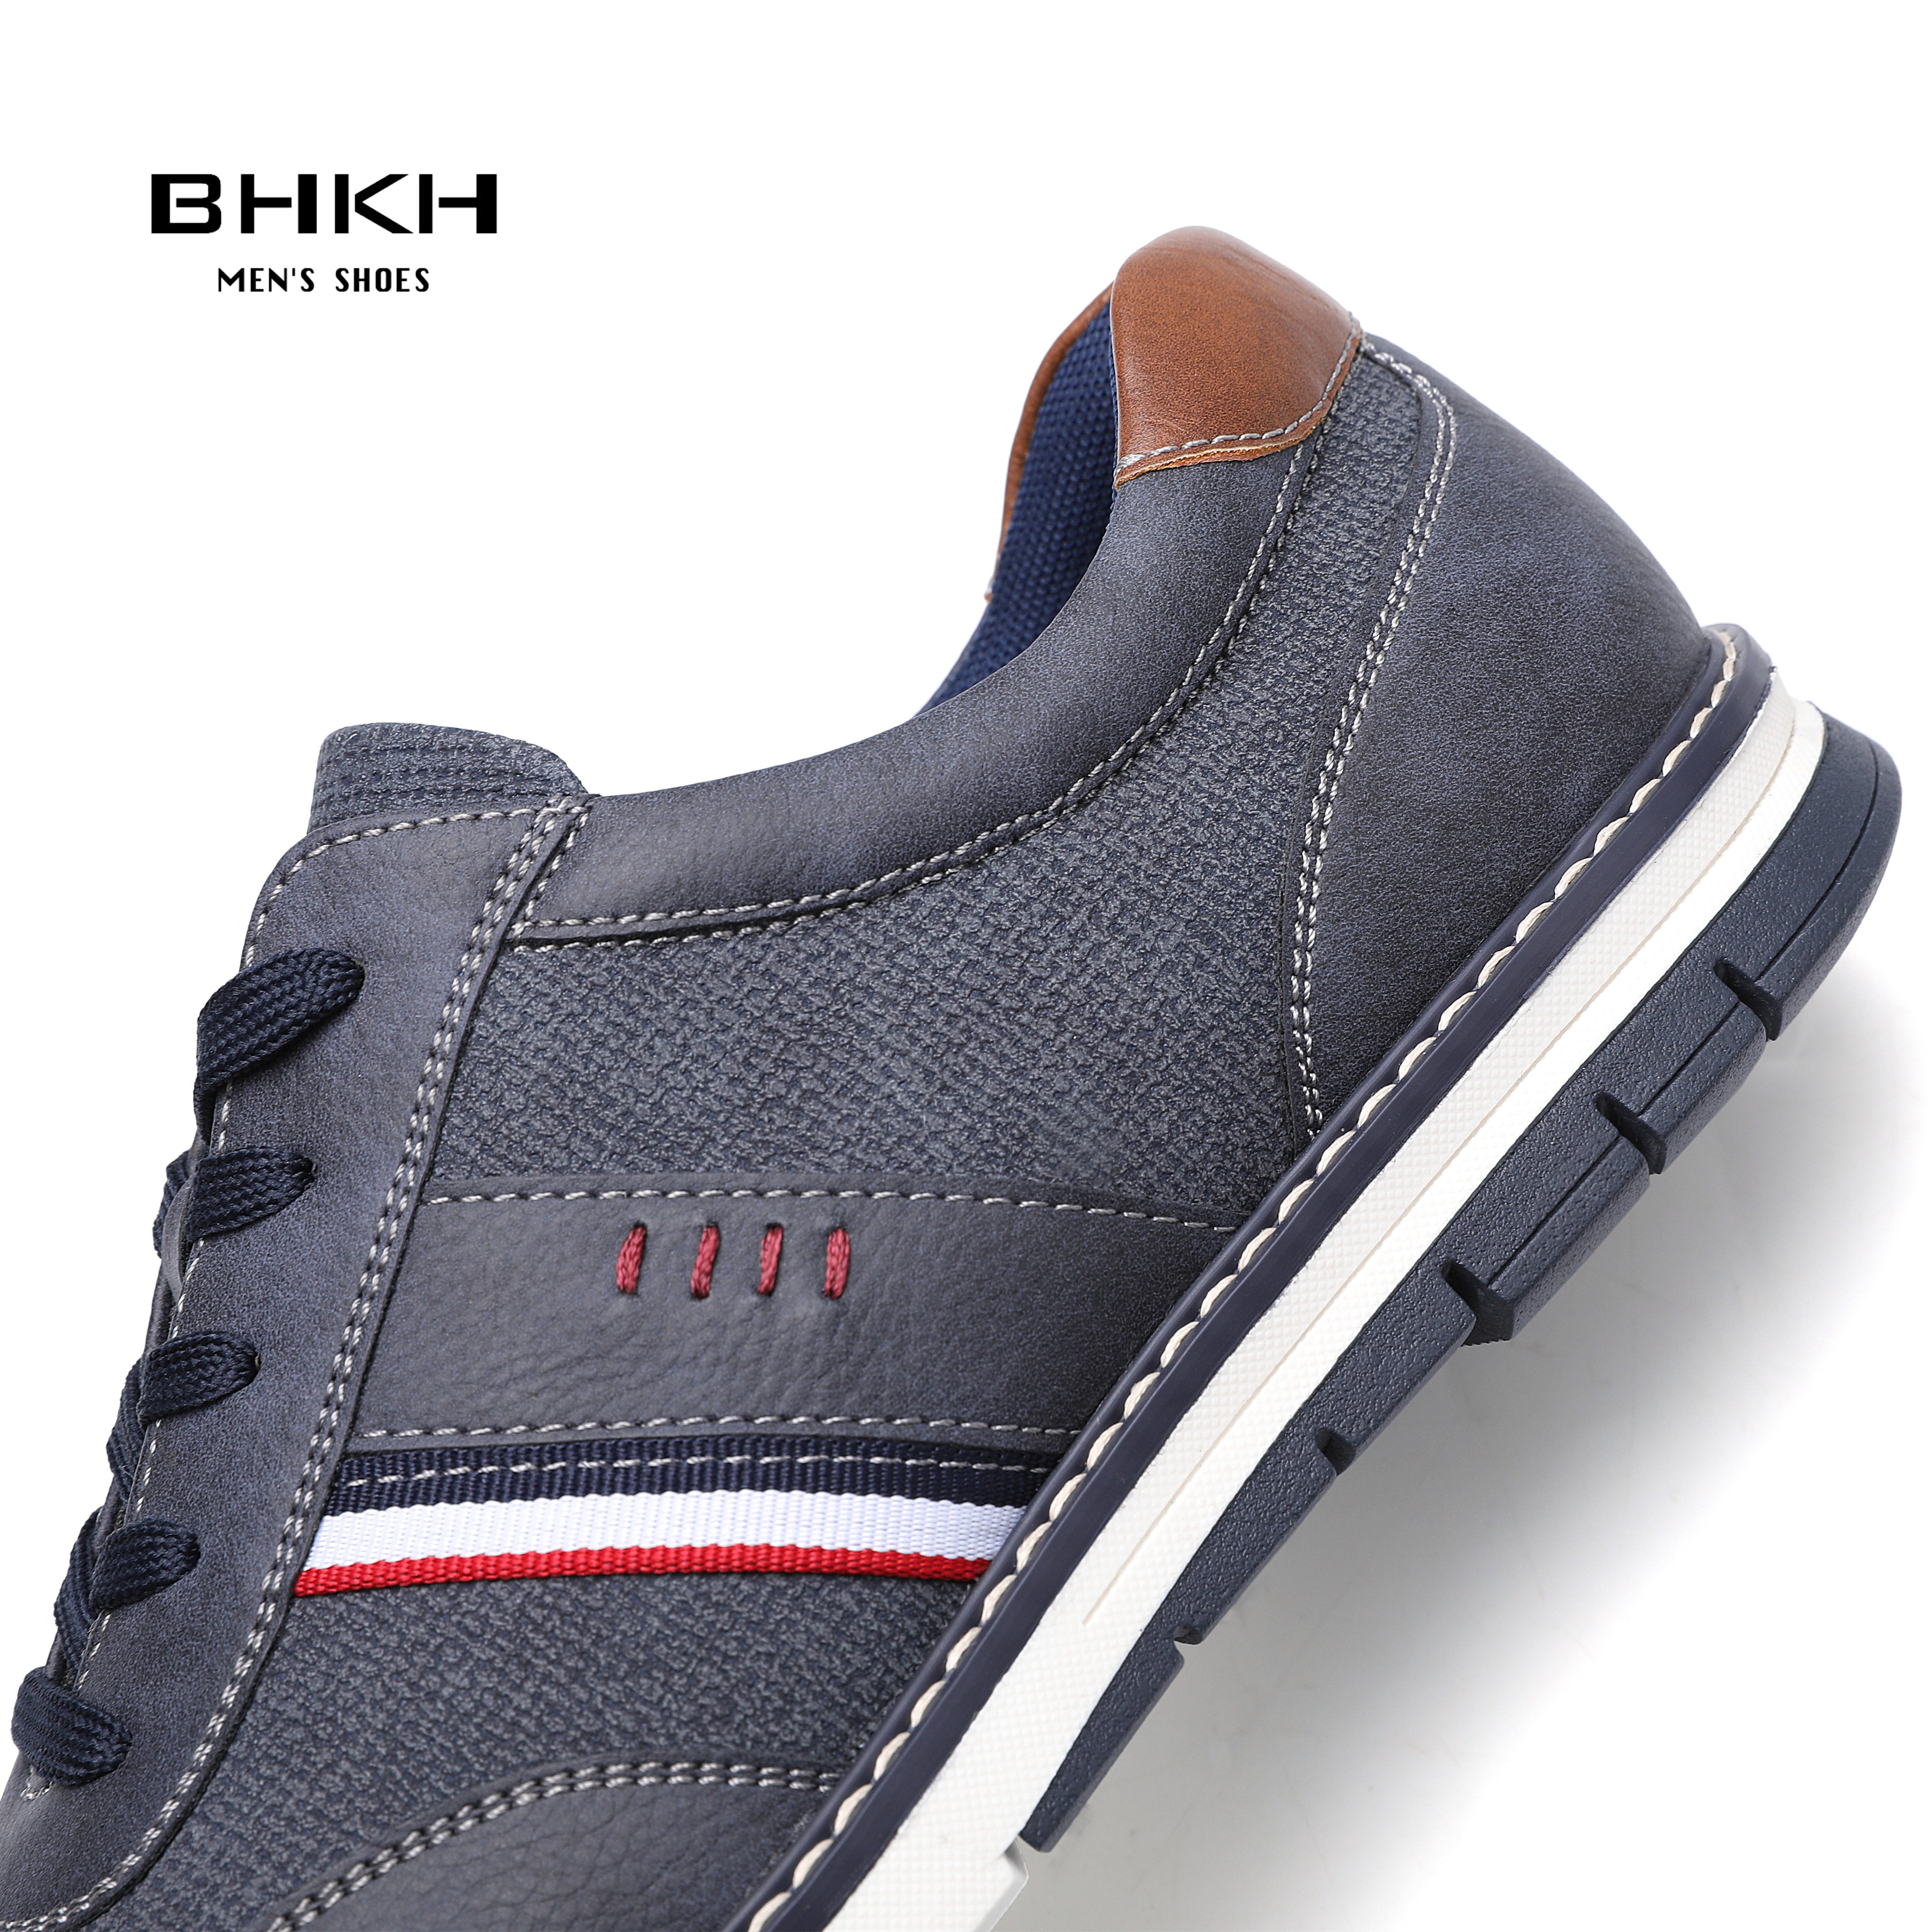 BHKH 2022 Spring/Autumn Men Casual Shoes PU Leather Fashion Sneakers Comfortable Walking Lace-up Footwear Men Shoes